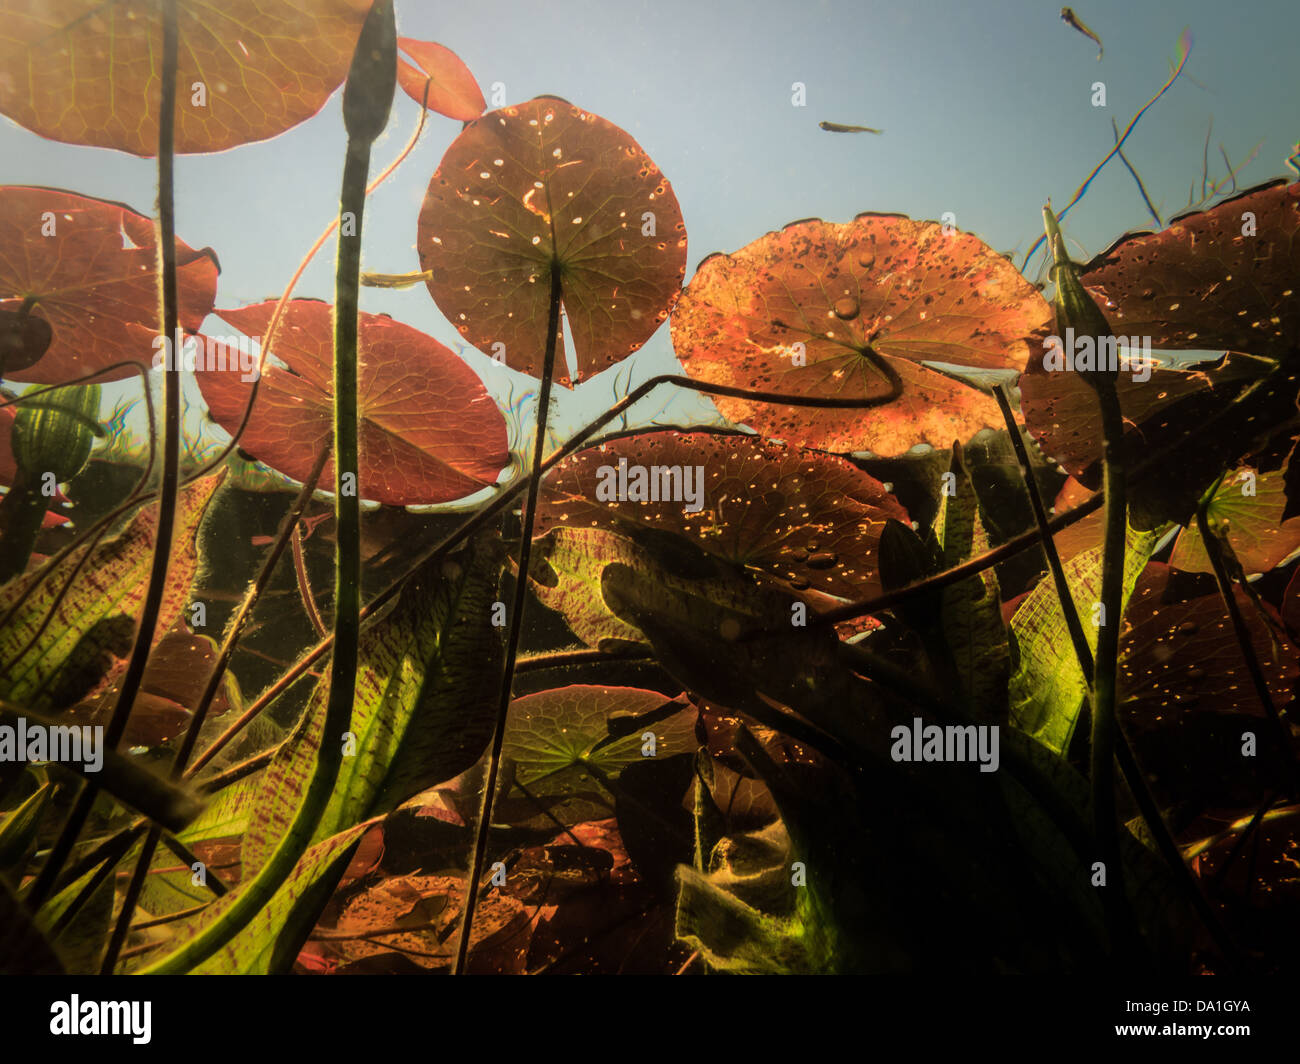 Underwater view of lily pads and colorful marsh vegetation on bright sunny day in Okavango Delta, Chobe National Park, Botswana Stock Photo